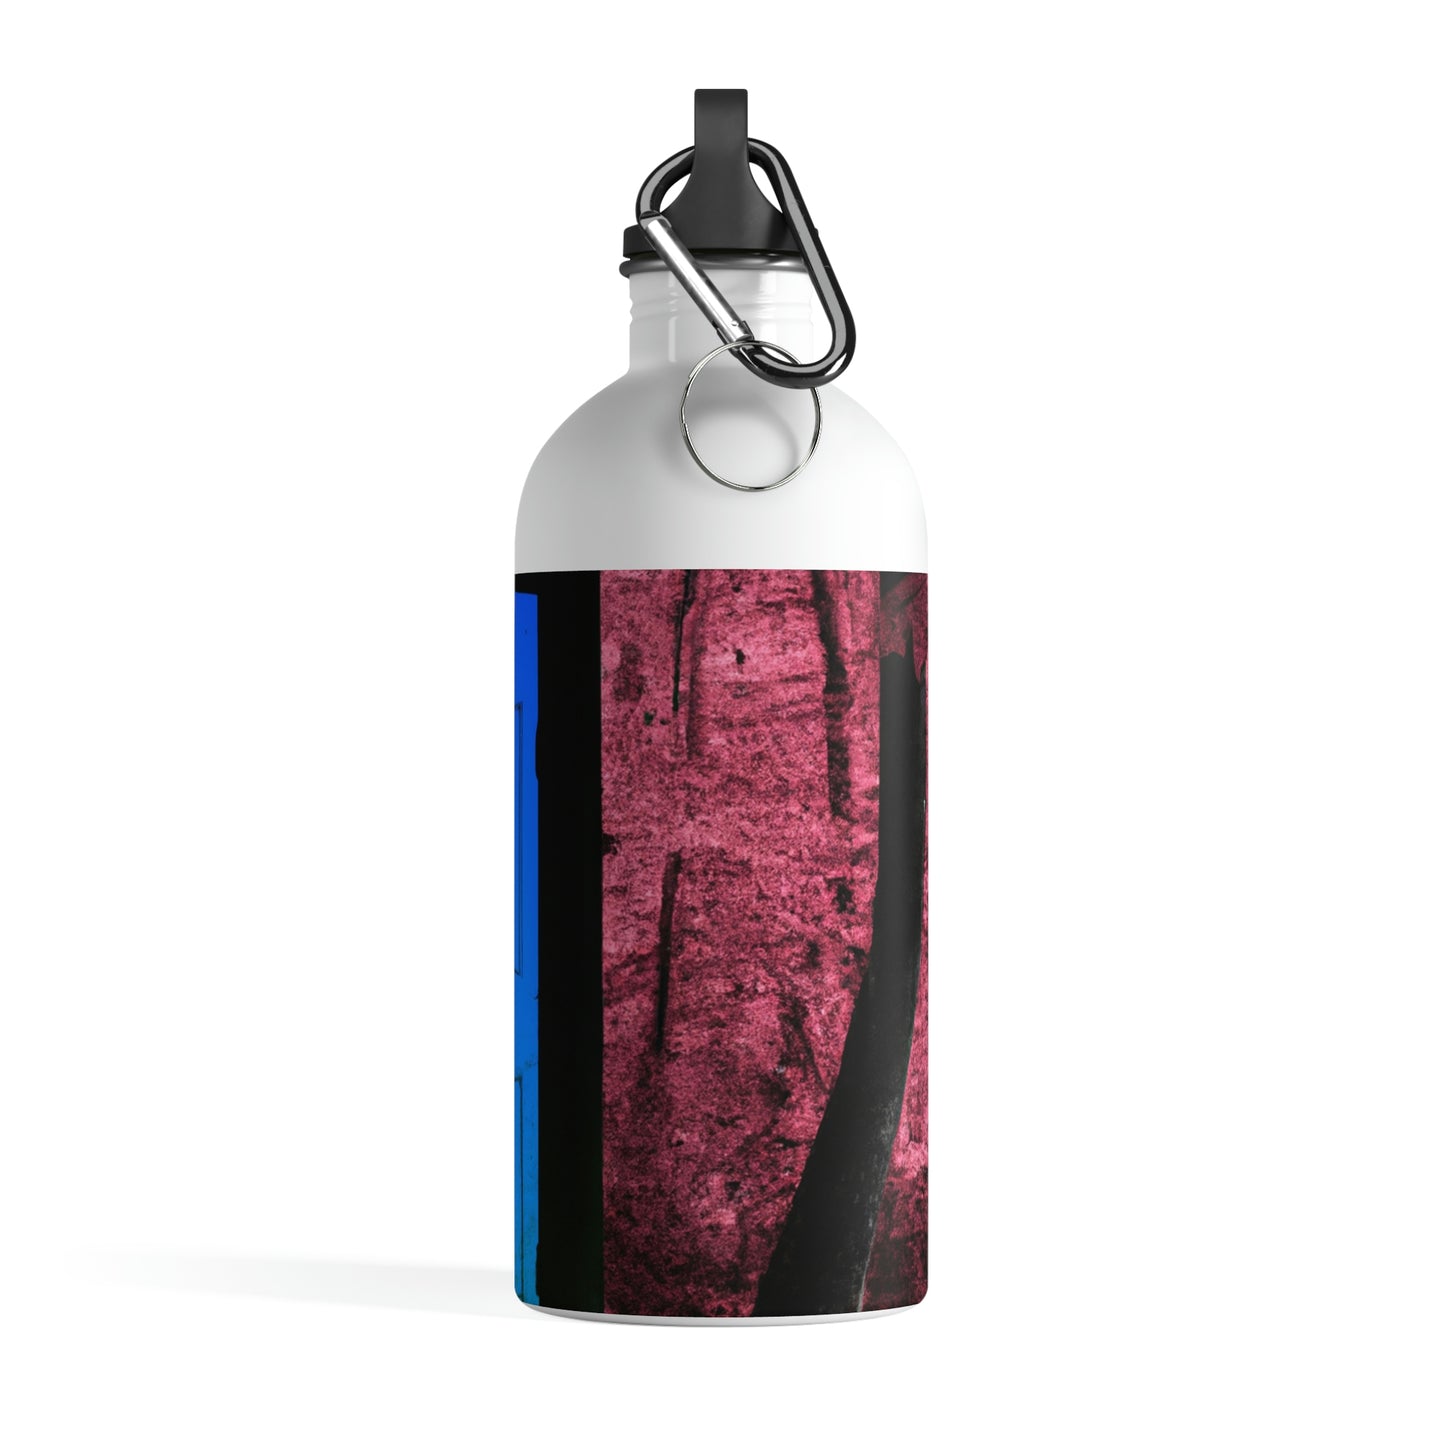 The Enigmatic Door of the Forest - The Alien Stainless Steel Water Bottle